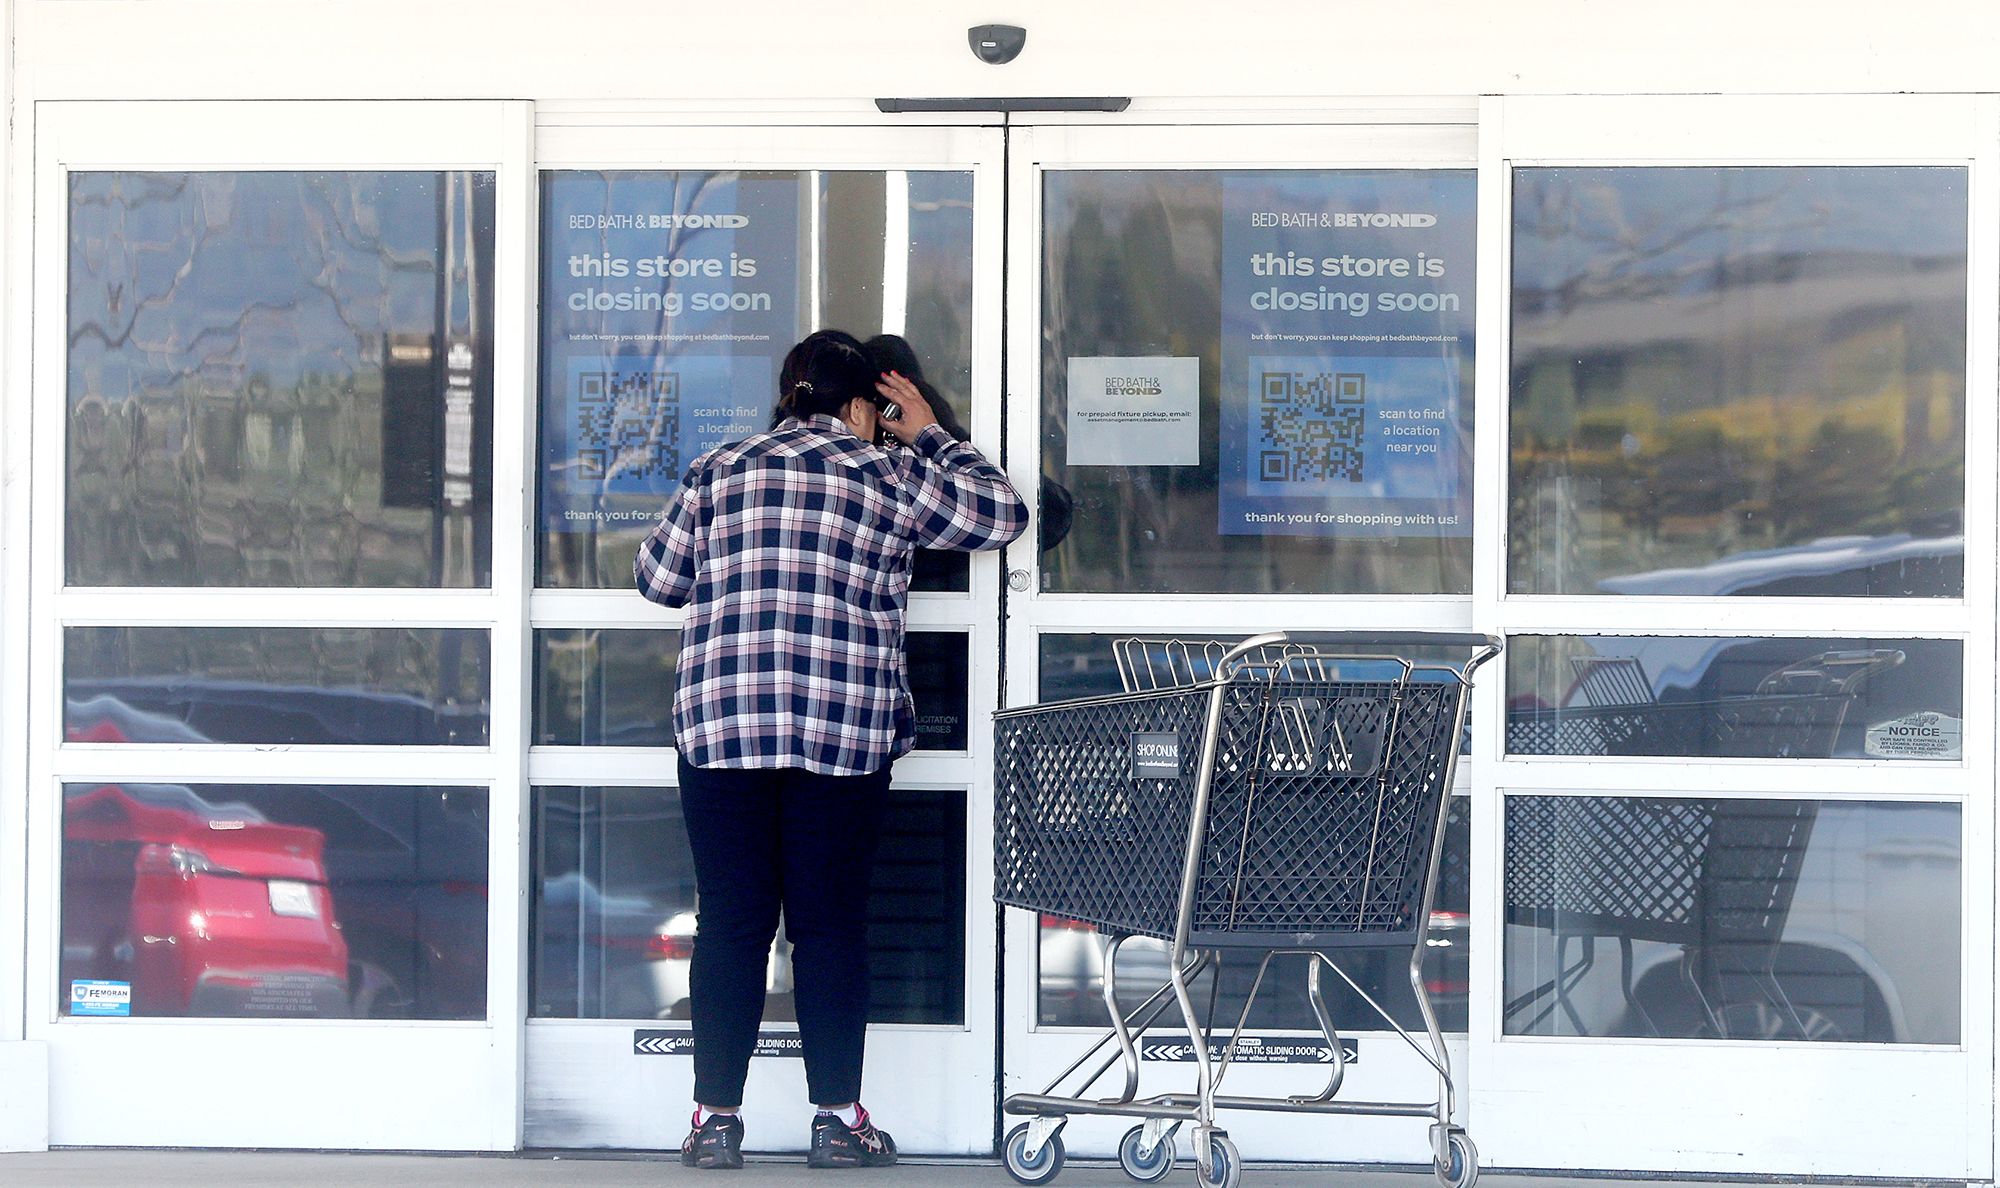 Bed Bath & Beyond Store Closings 2023: See the Full List